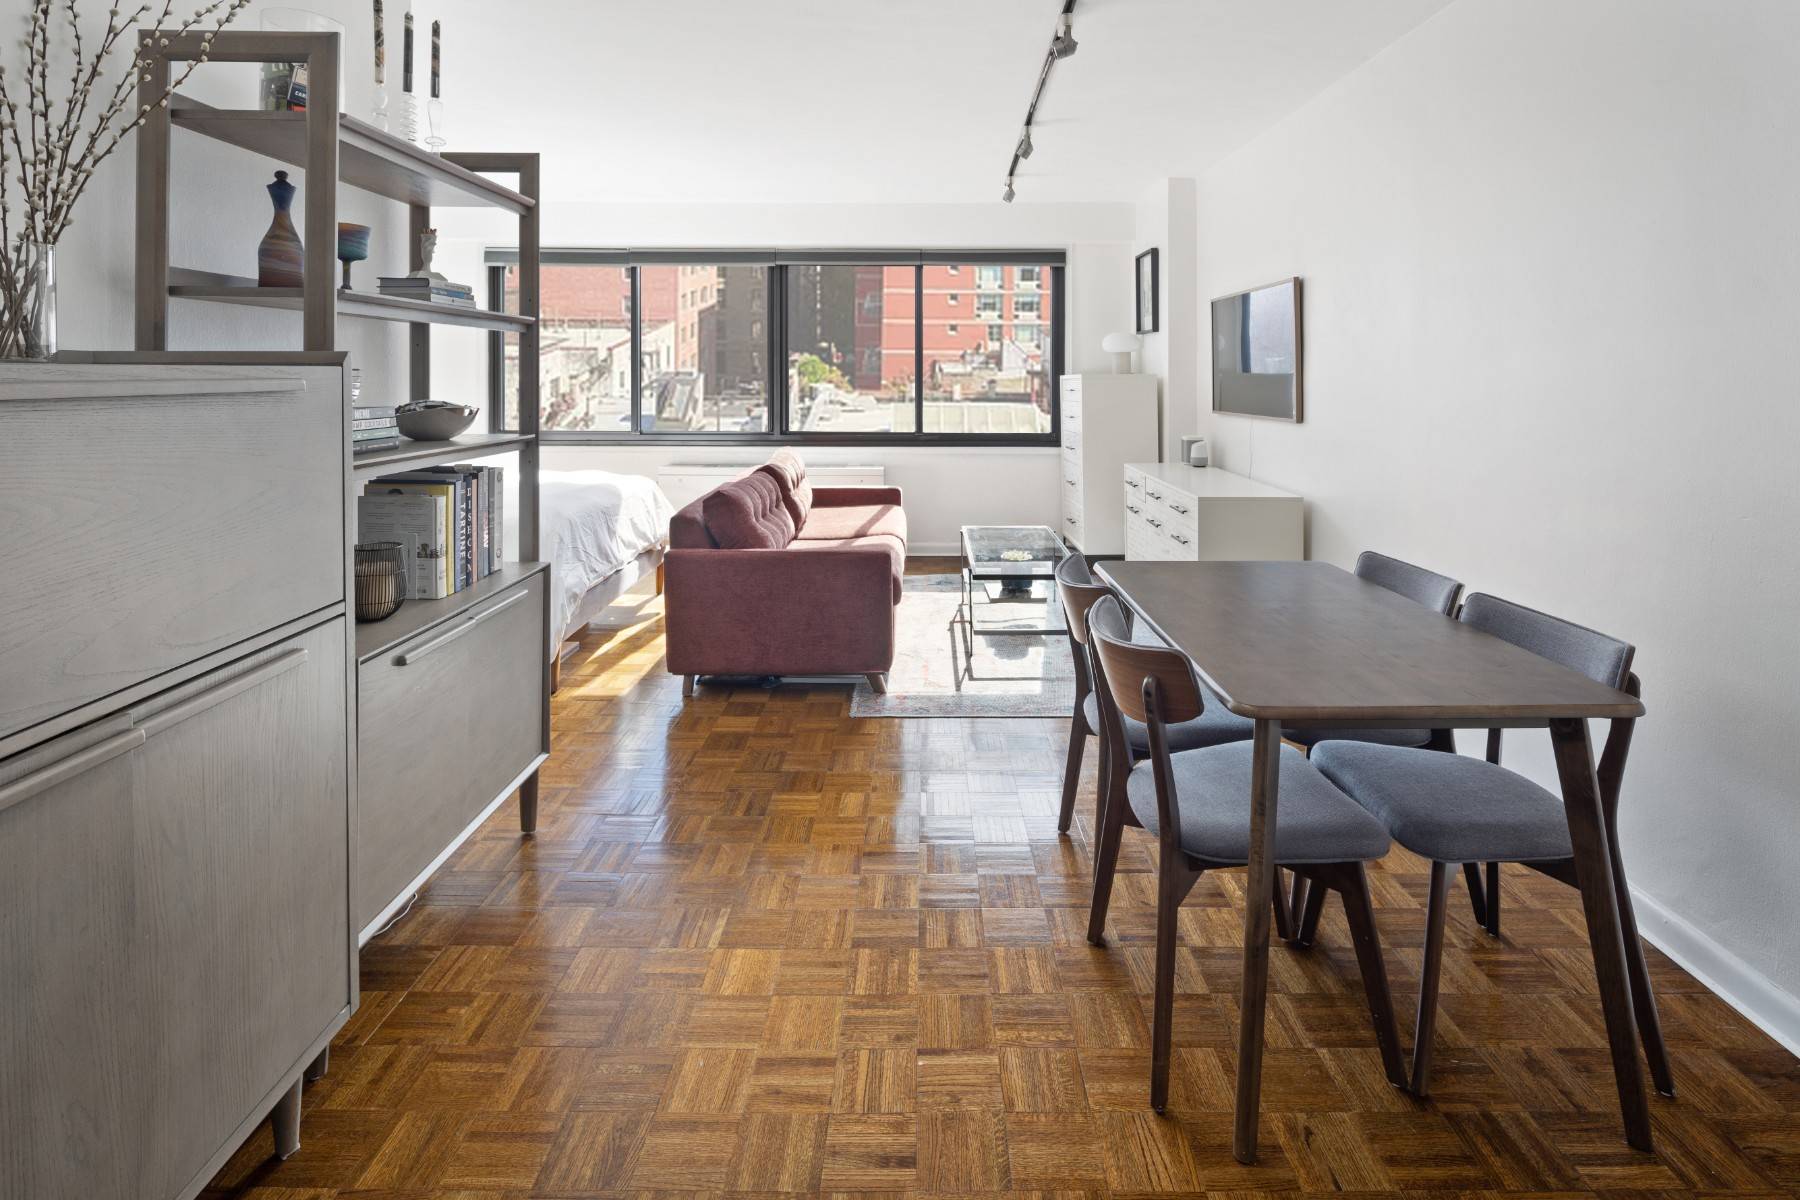 Introducing 201 W 21st St 8C at The Piermont, a charming retreat located in the vibrant Chelsea neighborhood of NYC.